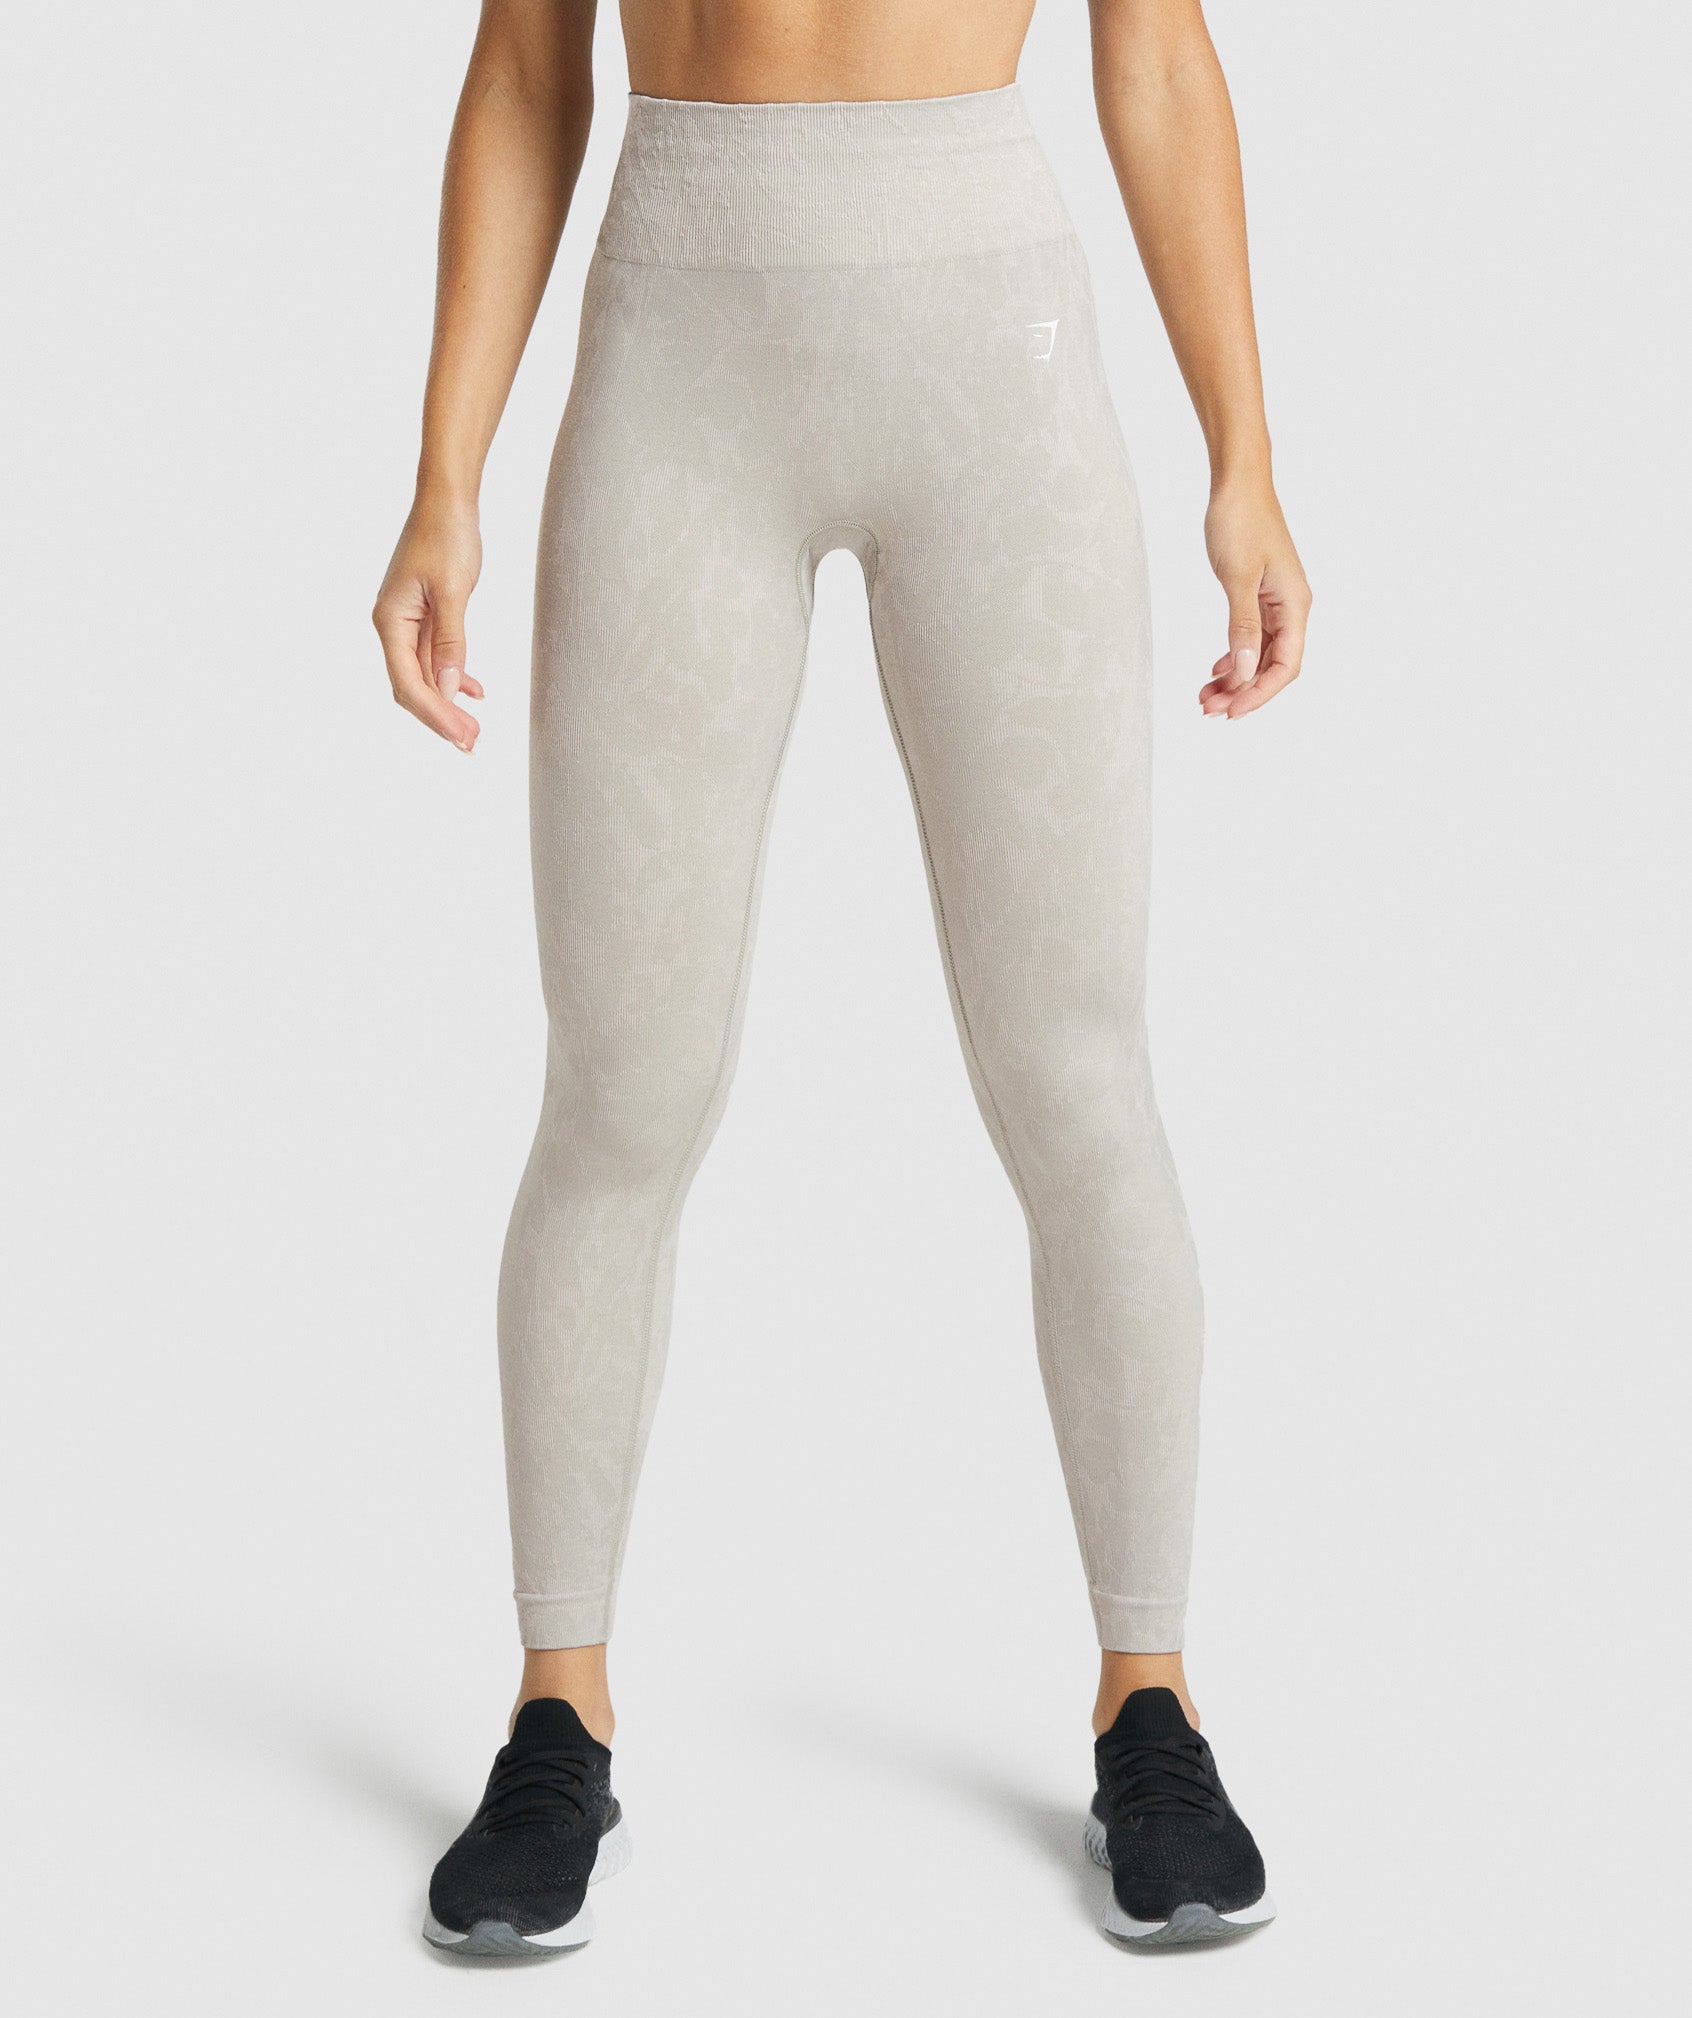 Adapt Animal Seamless Leggings in {{variantColor} is out of stock